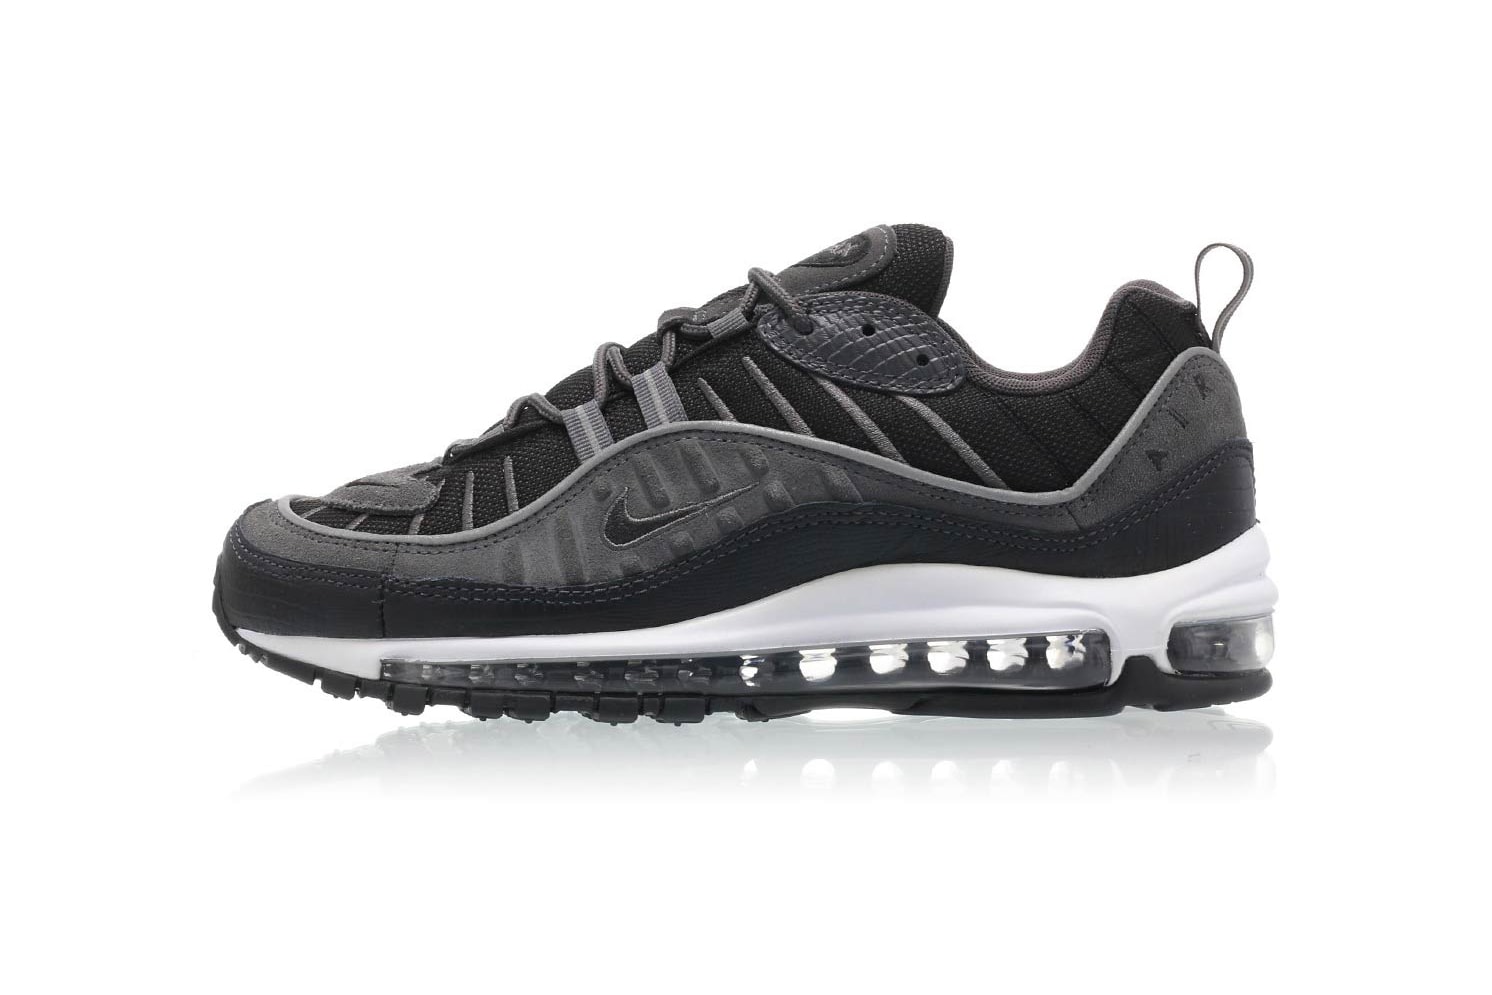 Nike Air Max 98 Anthracite grey black white may 2018 release date info drop sneakers shoes footwear titolo colorway limited